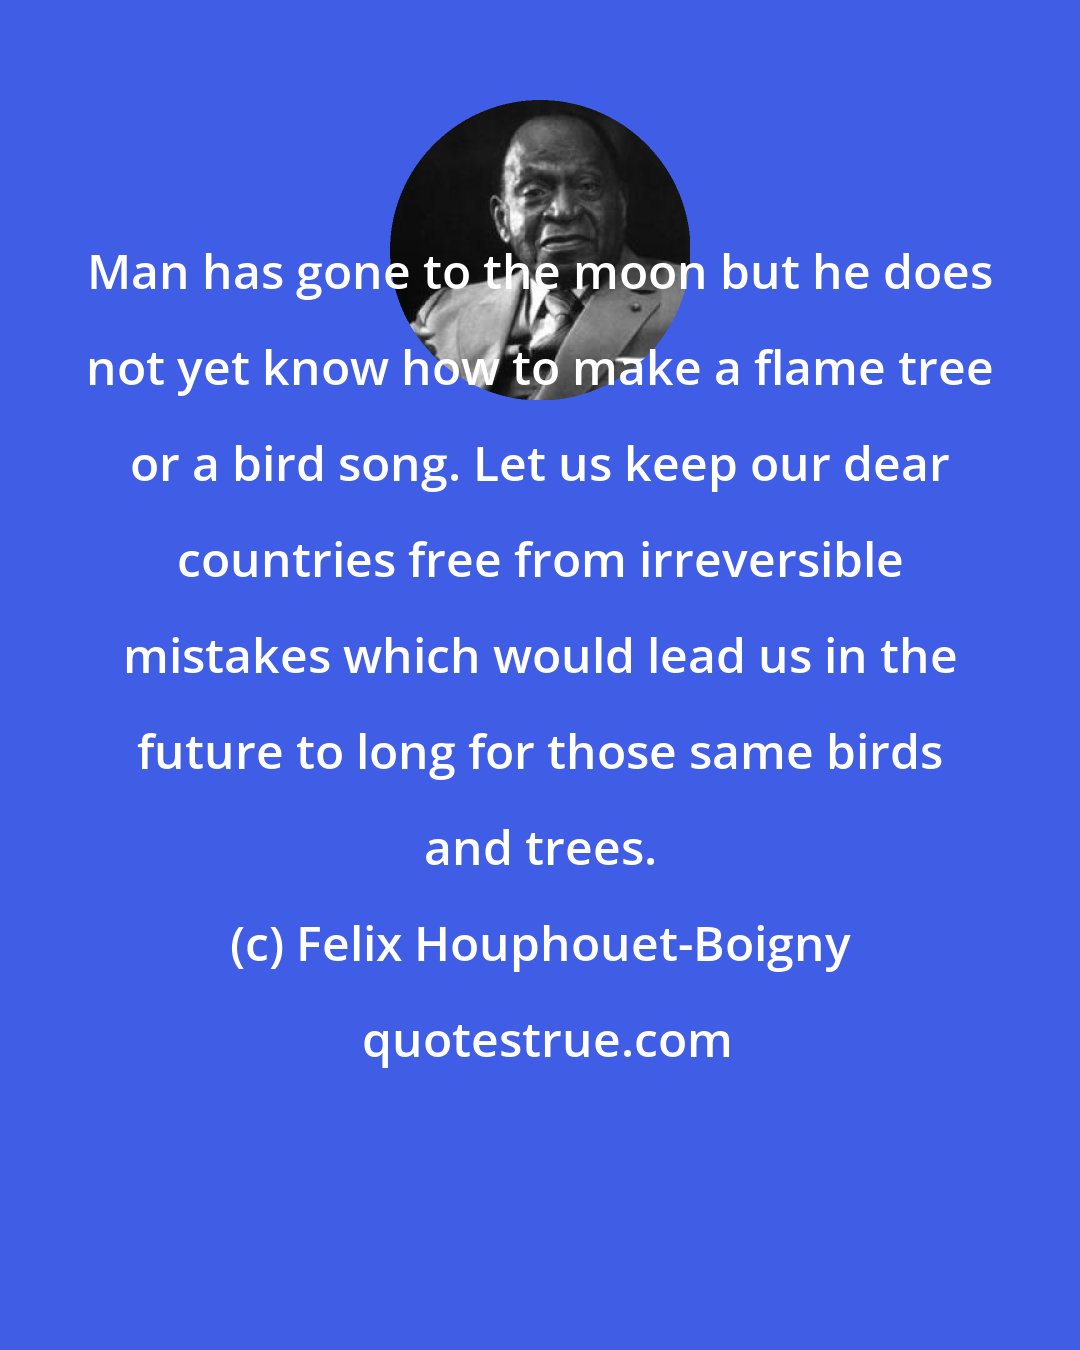 Felix Houphouet-Boigny: Man has gone to the moon but he does not yet know how to make a flame tree or a bird song. Let us keep our dear countries free from irreversible mistakes which would lead us in the future to long for those same birds and trees.